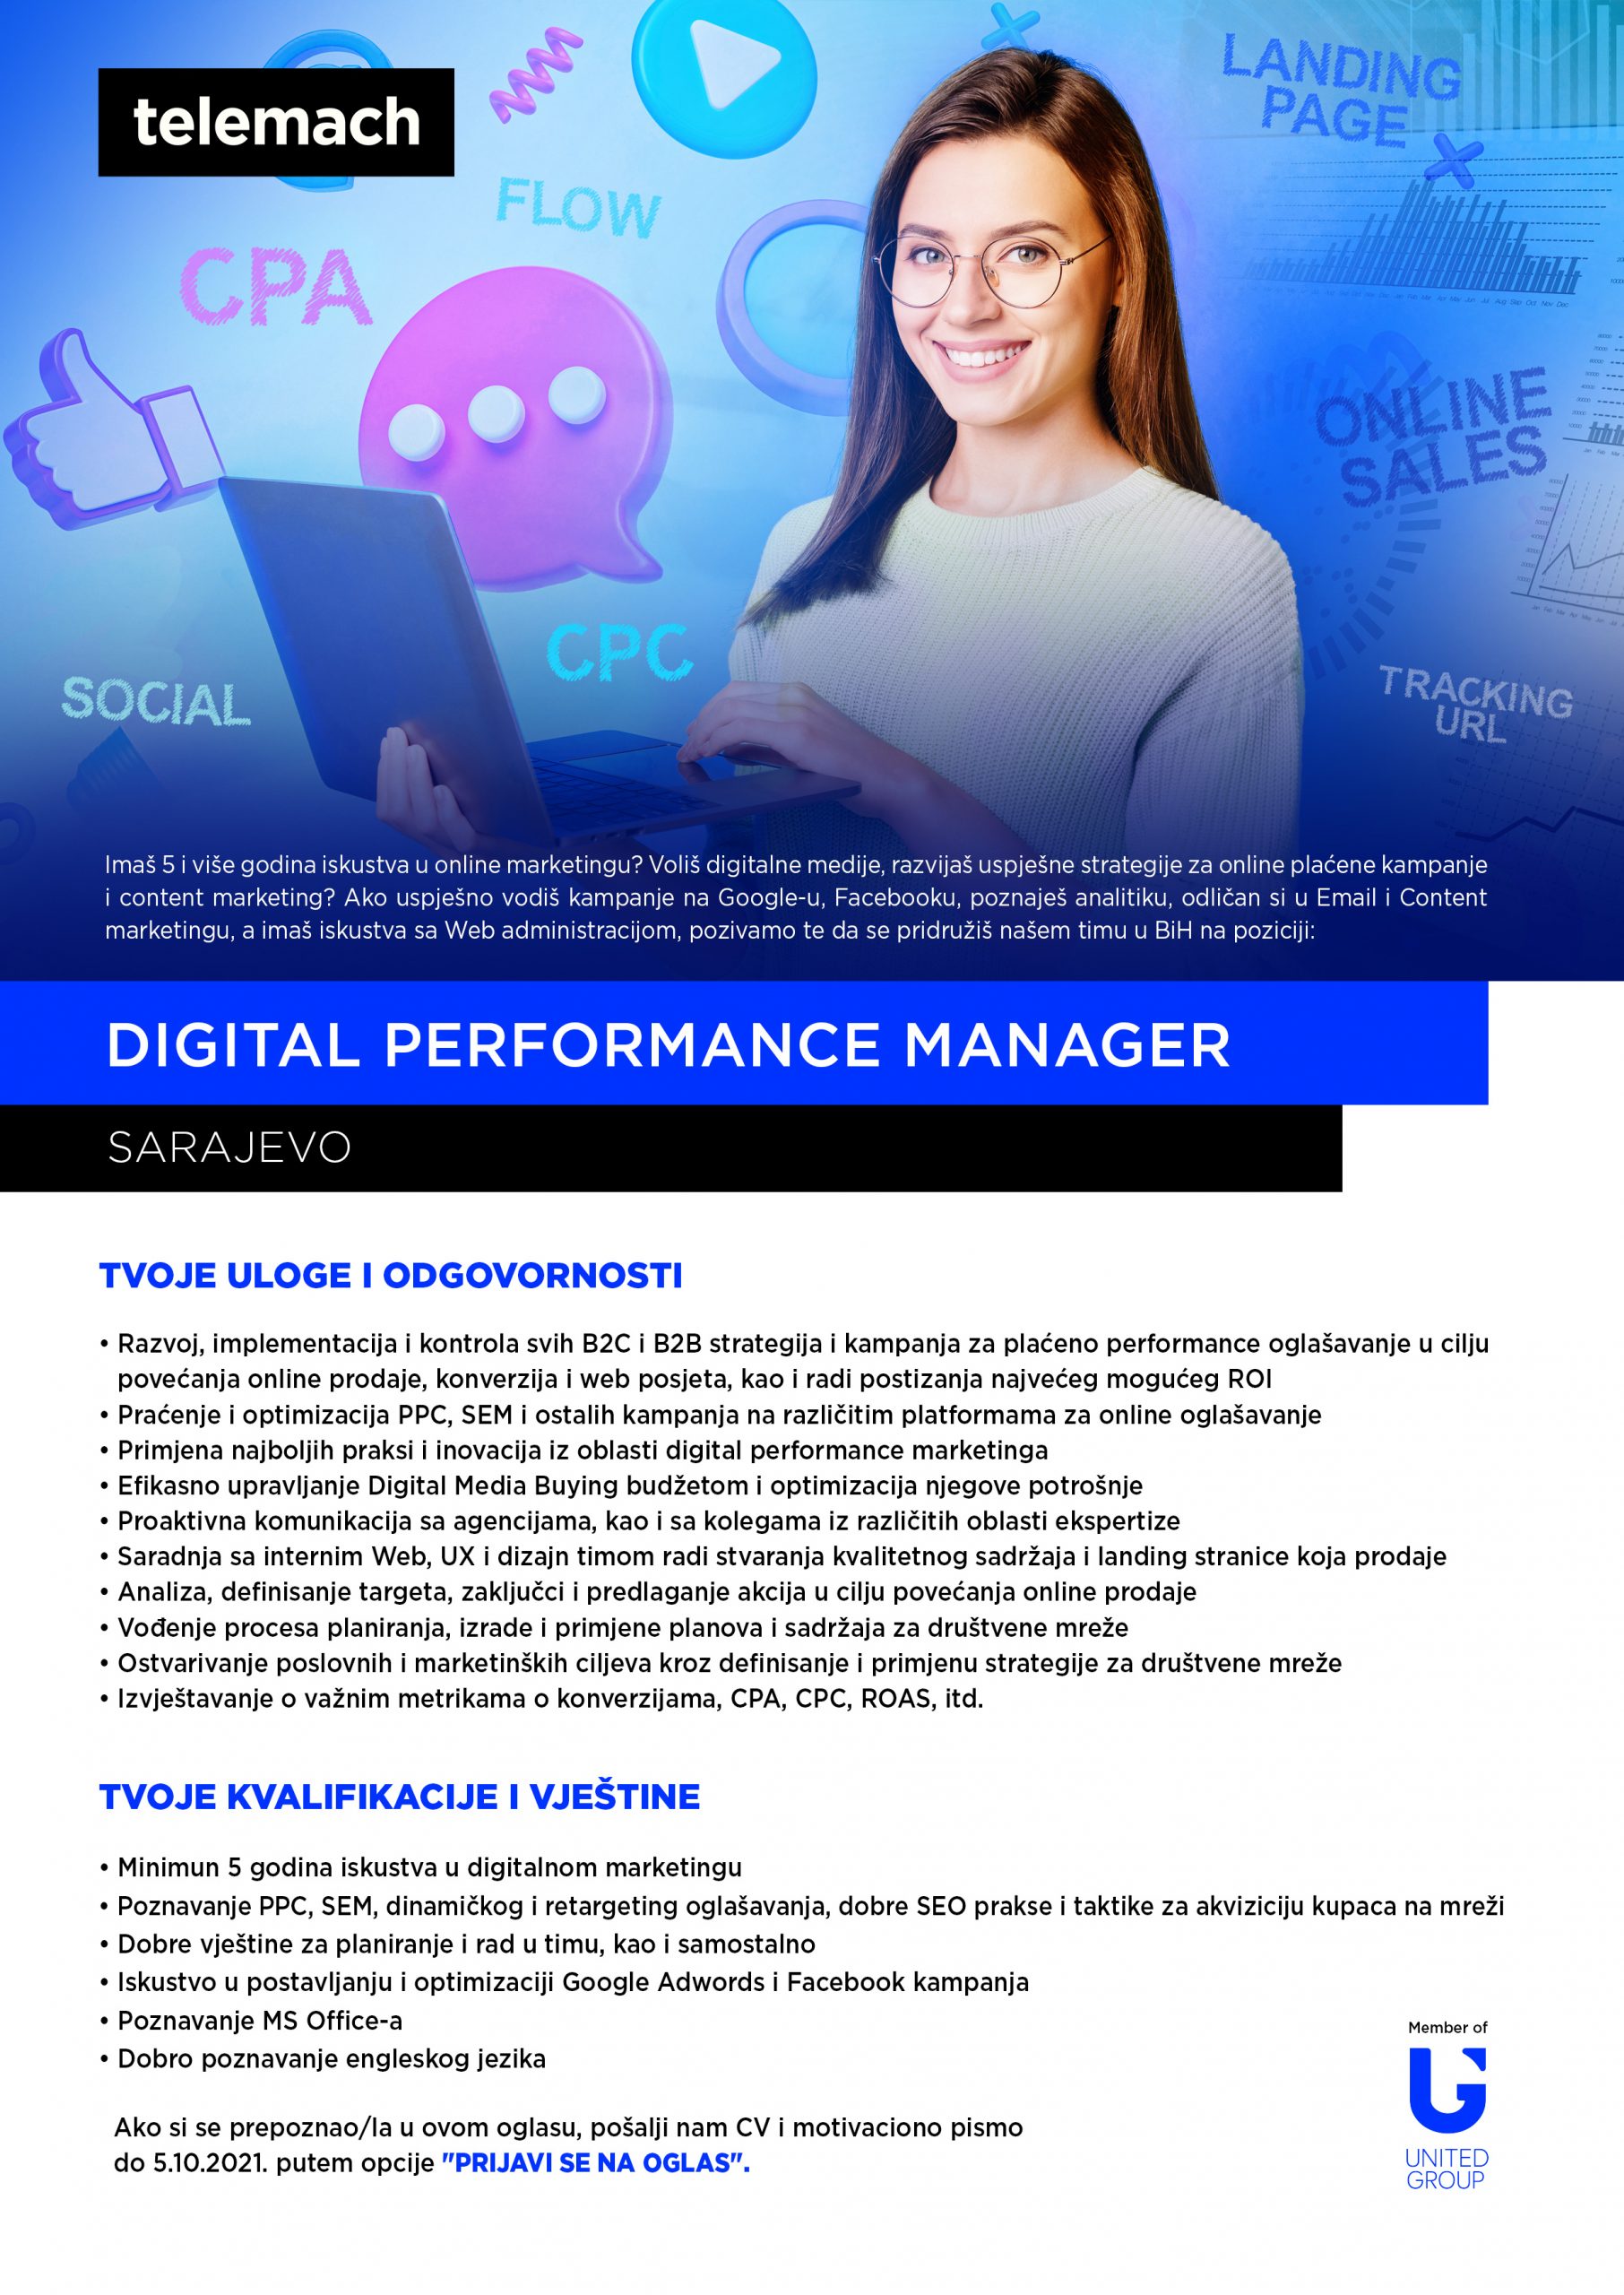 Performance manager